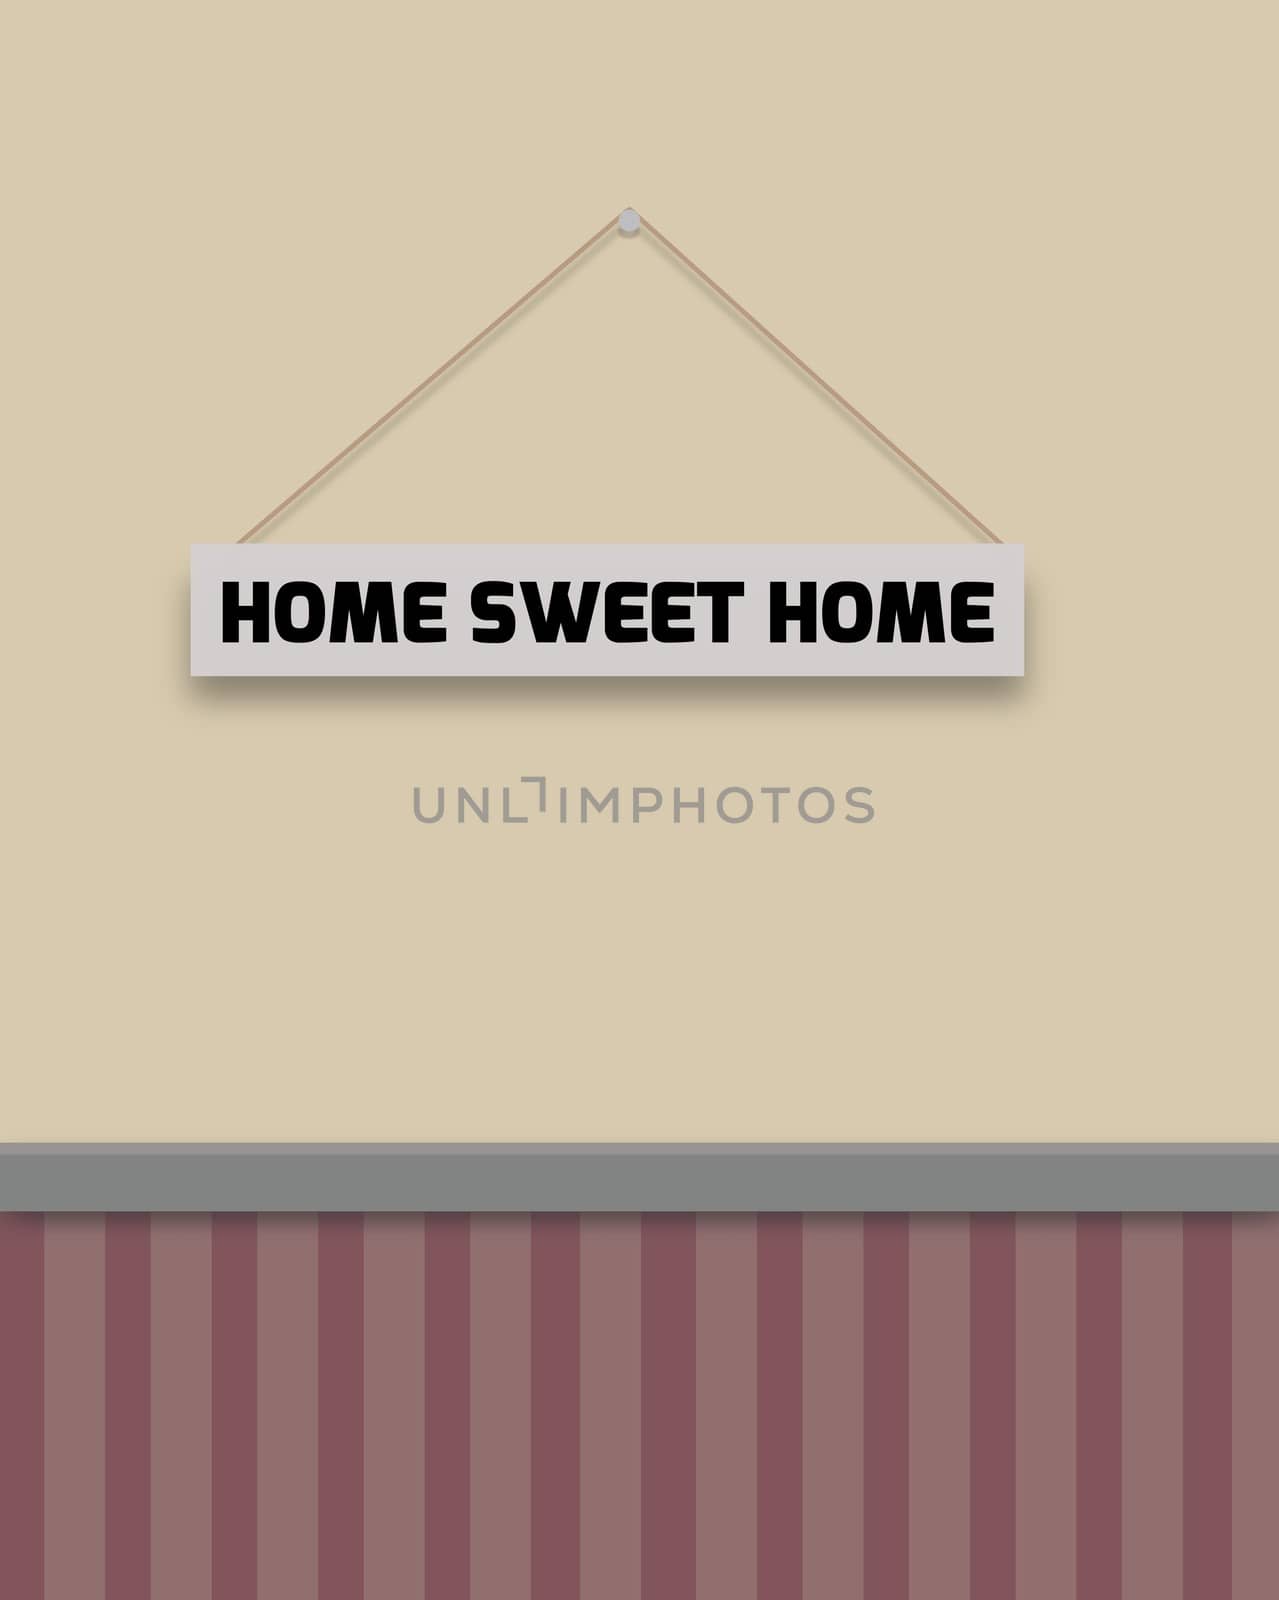 Illustration of a sign hanging on a wall with the text Home Sweet Home